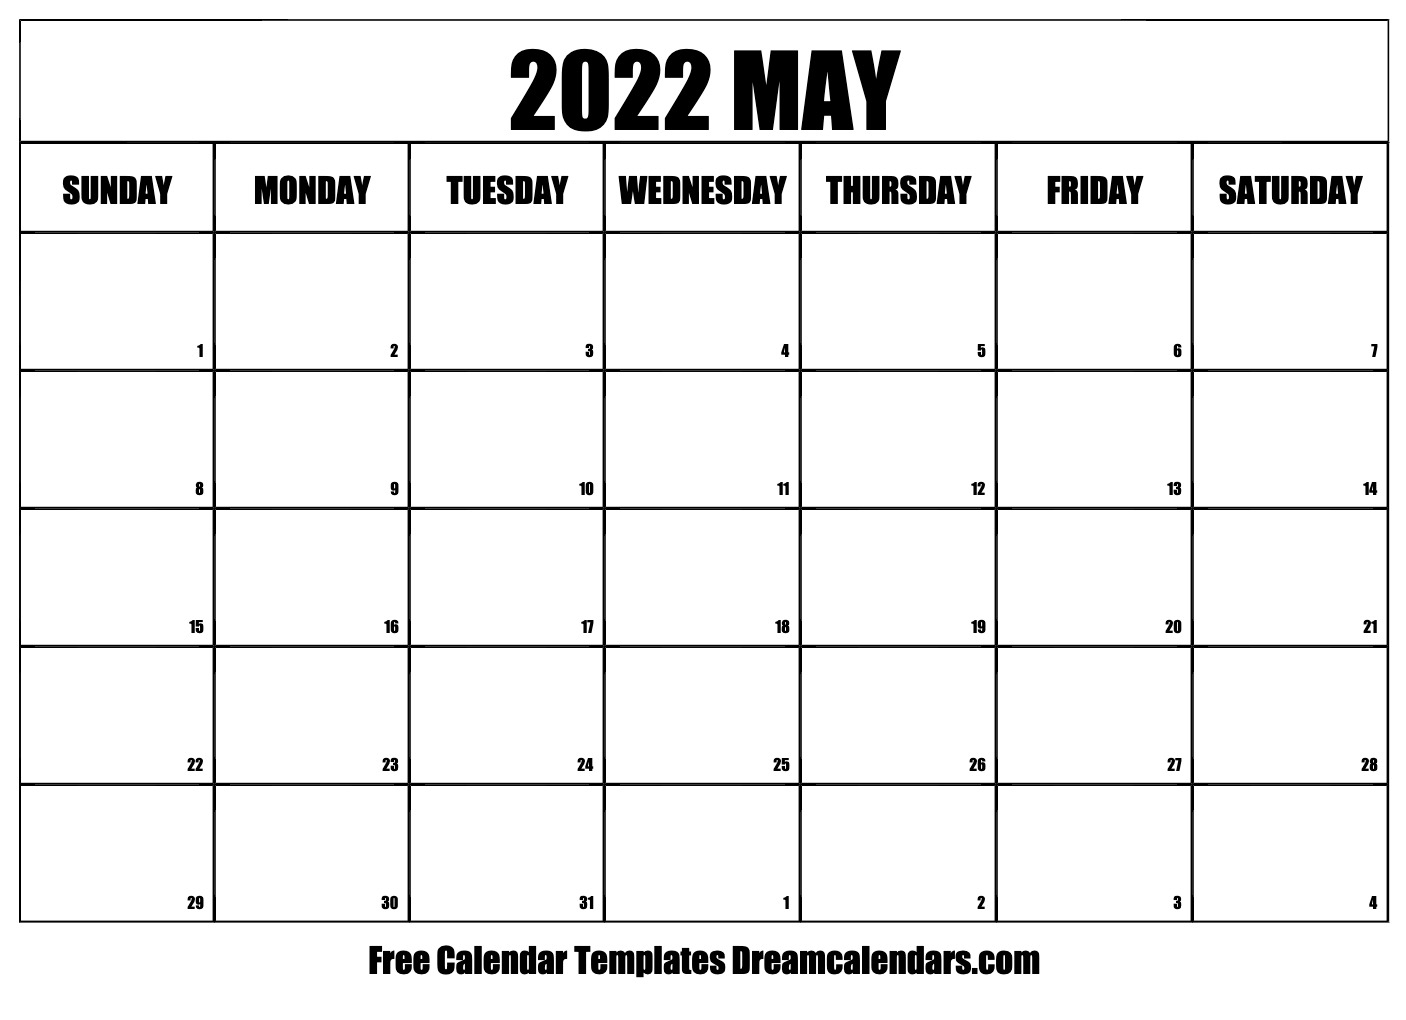 Get Calendar For May 2022 With Holidays